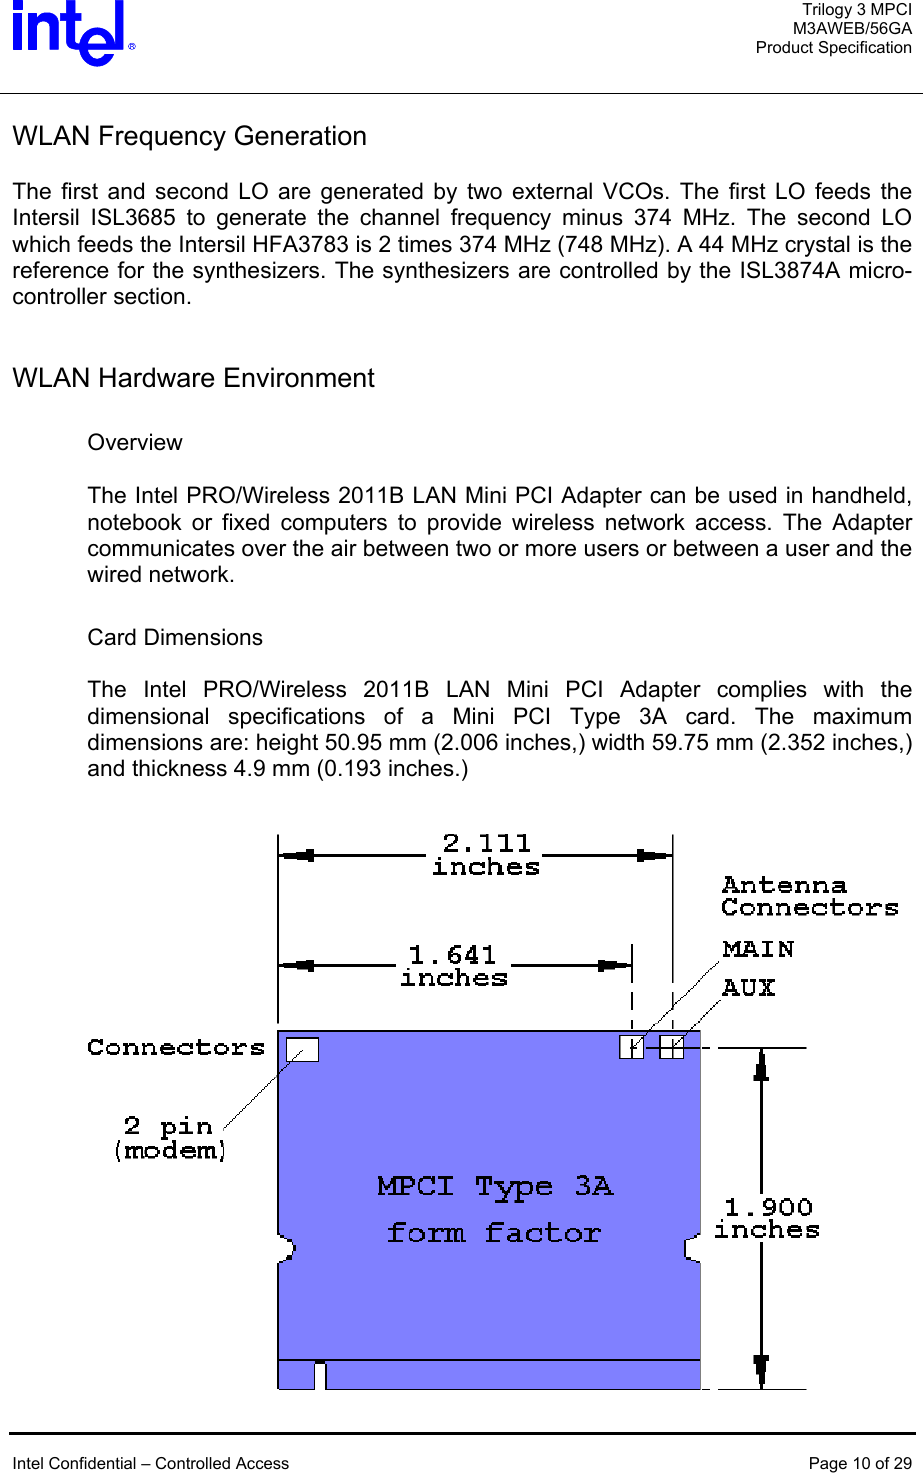  Trilogy 3 MPCI M3AWEB/56GA Product Specification   WLAN Frequency Generation  The first and second LO are generated by two external VCOs. The first LO feeds the Intersil ISL3685 to generate the channel frequency minus 374 MHz. The second LO which feeds the Intersil HFA3783 is 2 times 374 MHz (748 MHz). A 44 MHz crystal is the reference for the synthesizers. The synthesizers are controlled by the ISL3874A micro-controller section.   WLAN Hardware Environment  Overview  The Intel PRO/Wireless 2011B LAN Mini PCI Adapter can be used in handheld, notebook or fixed computers to provide wireless network access. The Adapter communicates over the air between two or more users or between a user and the wired network.   Card Dimensions  The Intel PRO/Wireless 2011B LAN Mini PCI Adapter complies with the dimensional specifications of a Mini PCI Type 3A card. The maximum dimensions are: height 50.95 mm (2.006 inches,) width 59.75 mm (2.352 inches,) and thickness 4.9 mm (0.193 inches.)    Intel Confidential – Controlled Access  Page 10 of 29   